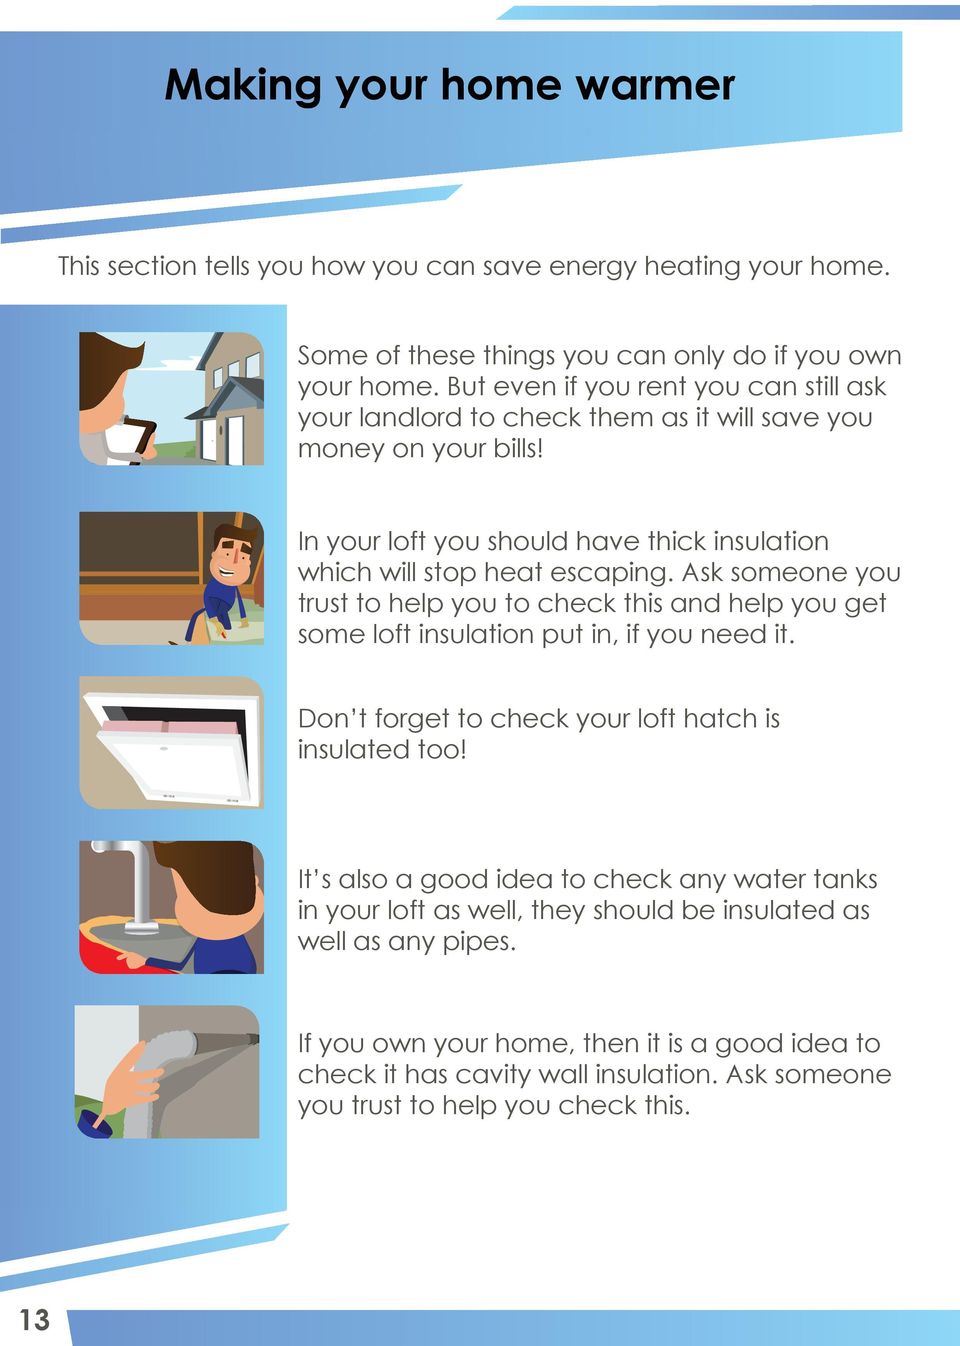 Ask someone you trust to help you to check this and help you get some loft insulation put in, if you need it. Don t forget to check your loft hatch is insulated too!